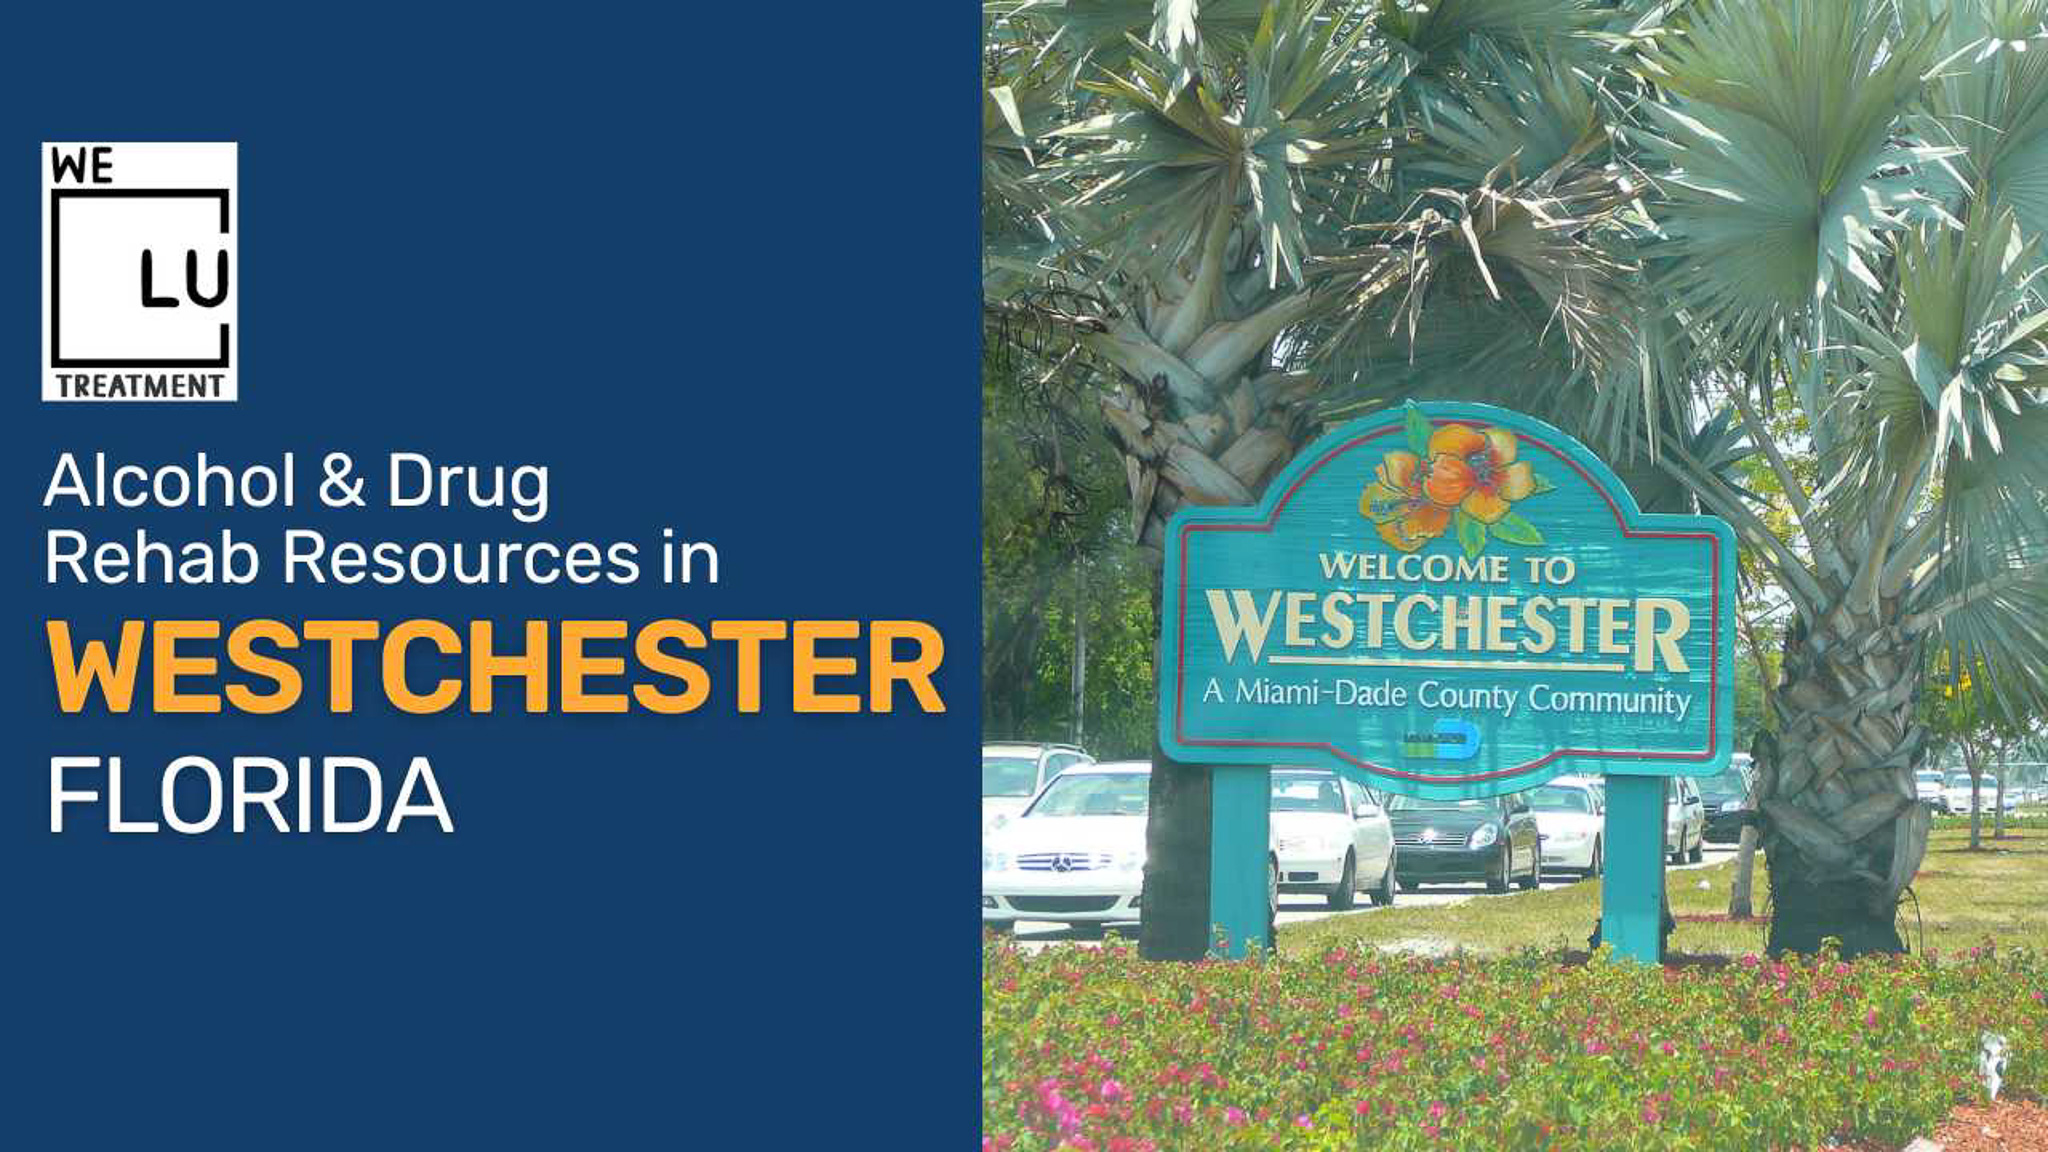 Westchester FL (SA) We Level Up treatment center for drug and alcohol rehab detox and mental health services - Image 1